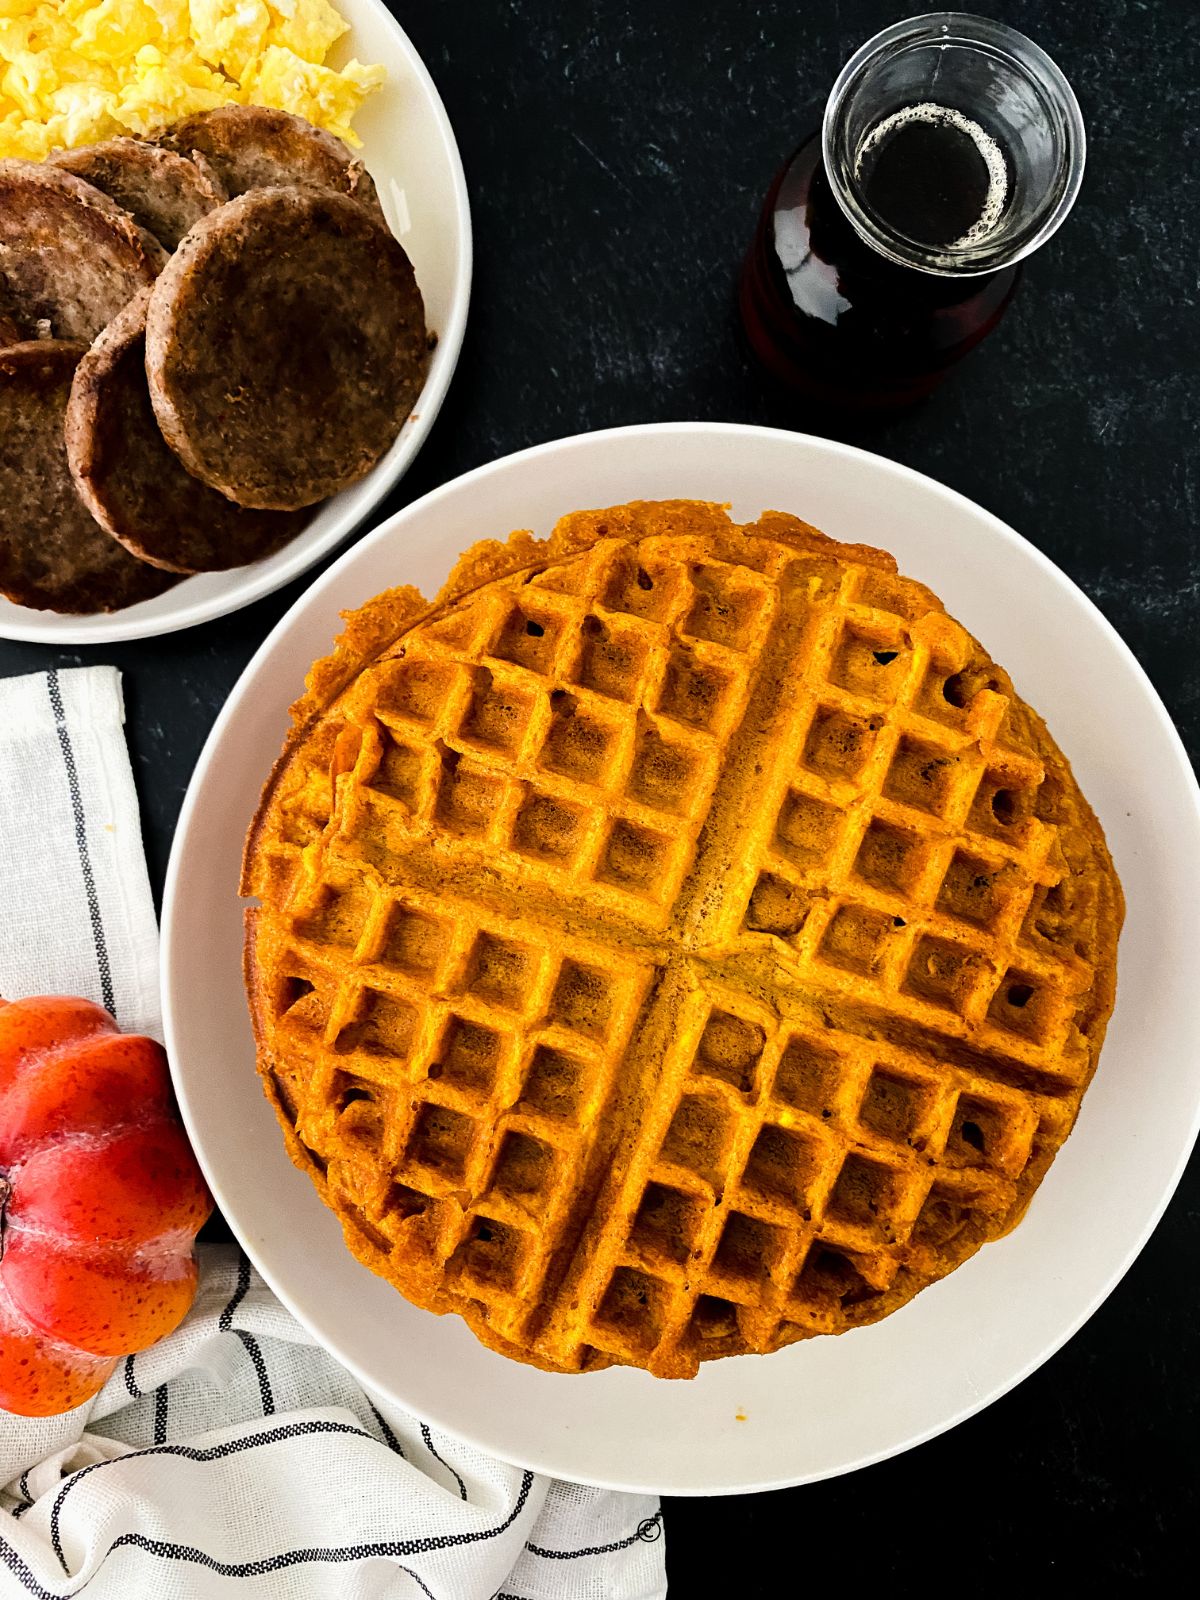 Homemade Pumpkin Waffles on Plate. Plate of sausage and eggs to the left.